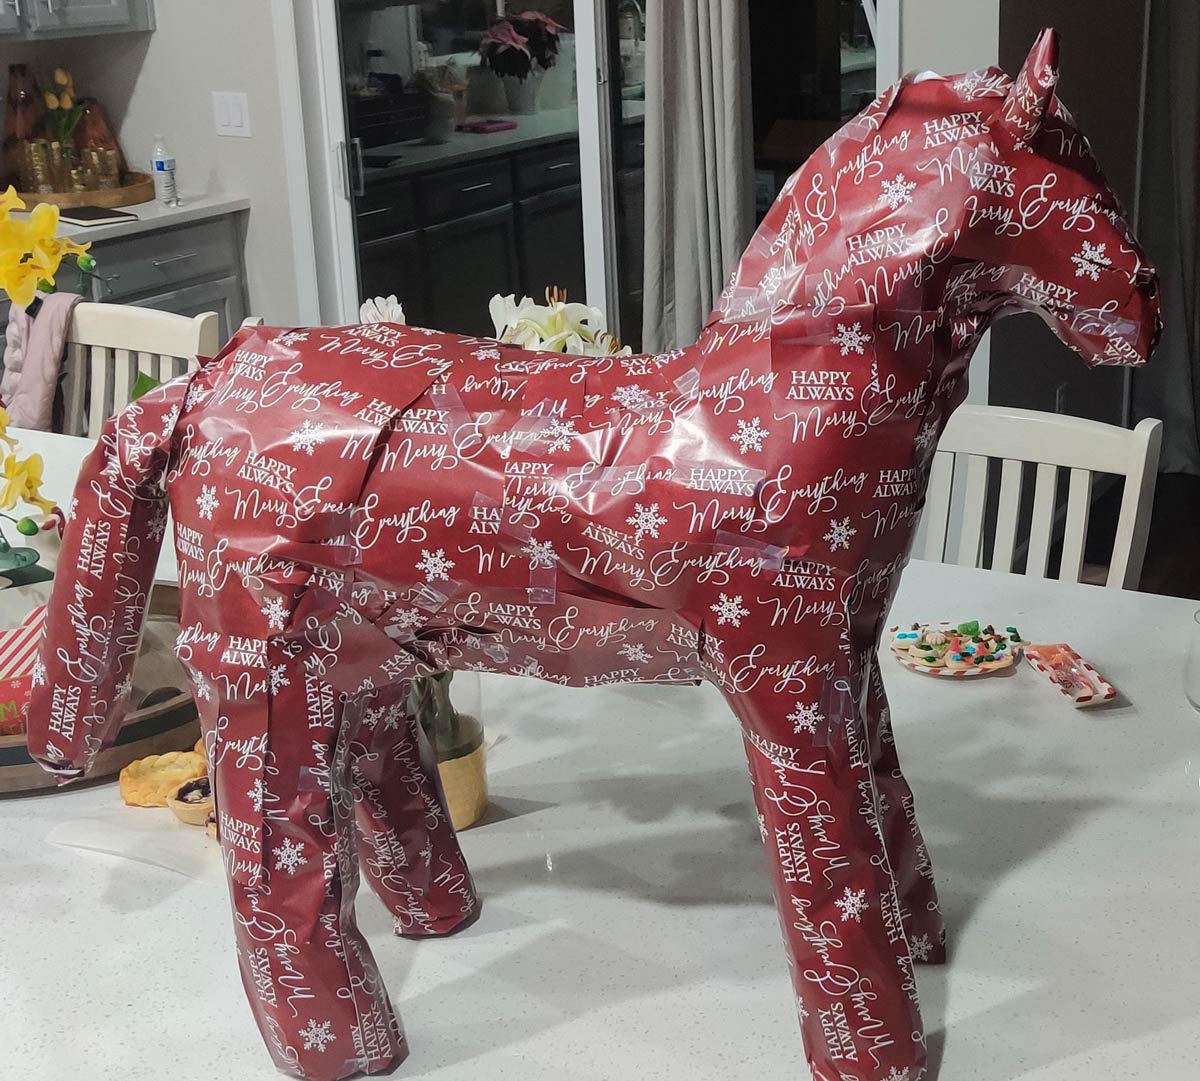 My daughter is obsessed with horses, but I can't afford to buy her one. Bought her a gift card for riding lessons and wrapped it like this